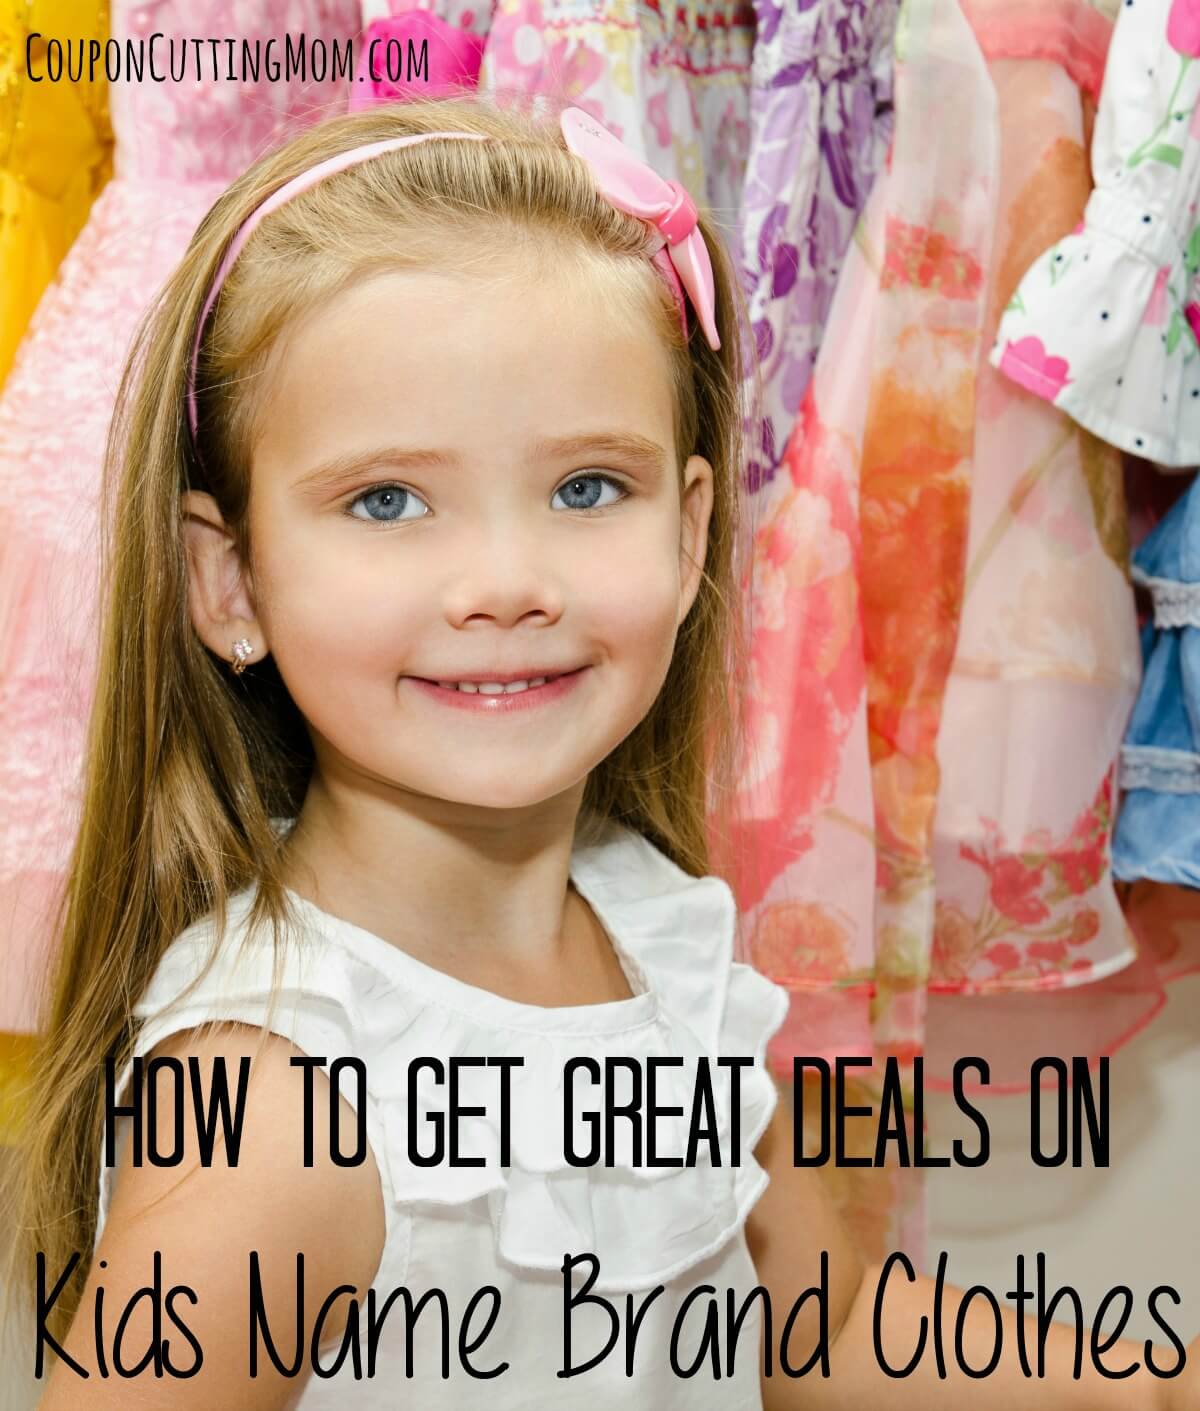 How To Get Great Deals On Kids Name Brand Clothes